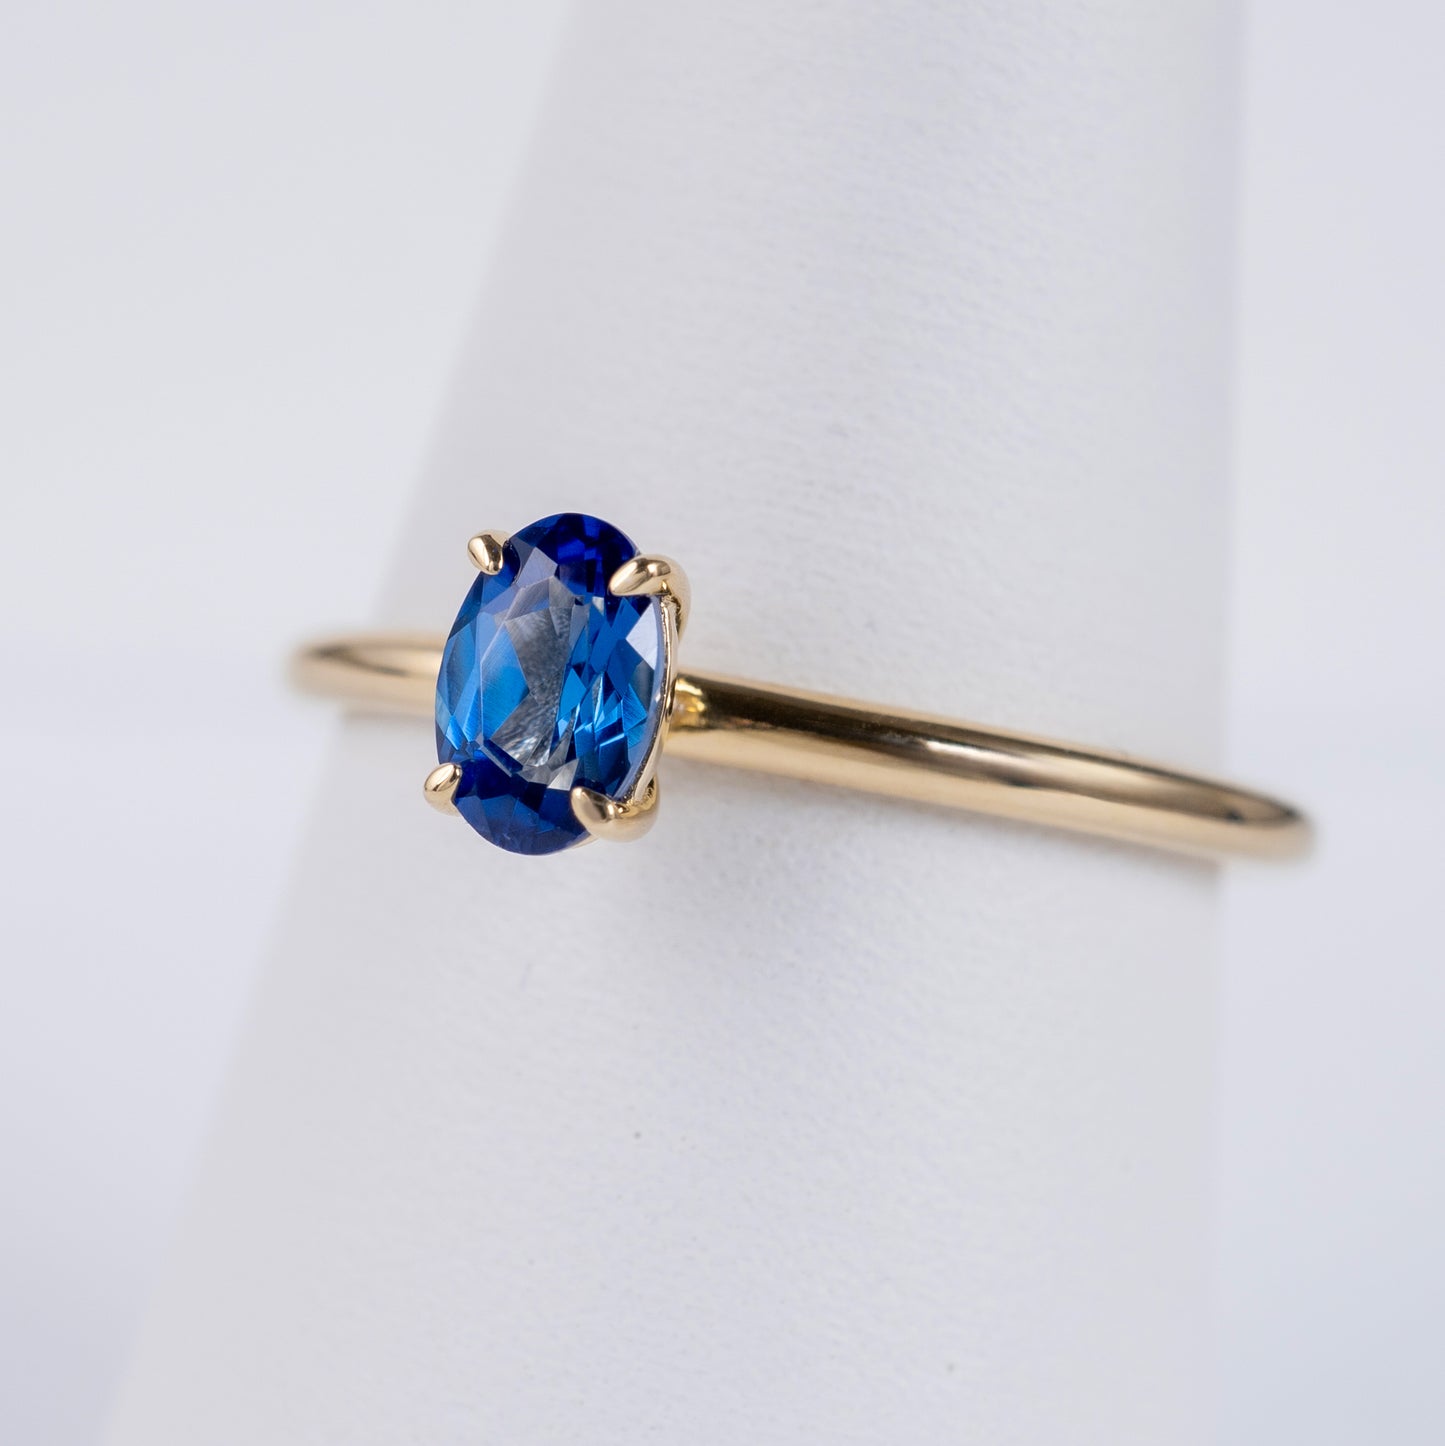 9ct Yellow Gold Lab Sapphire Solitaire Ring Full Hallmarks